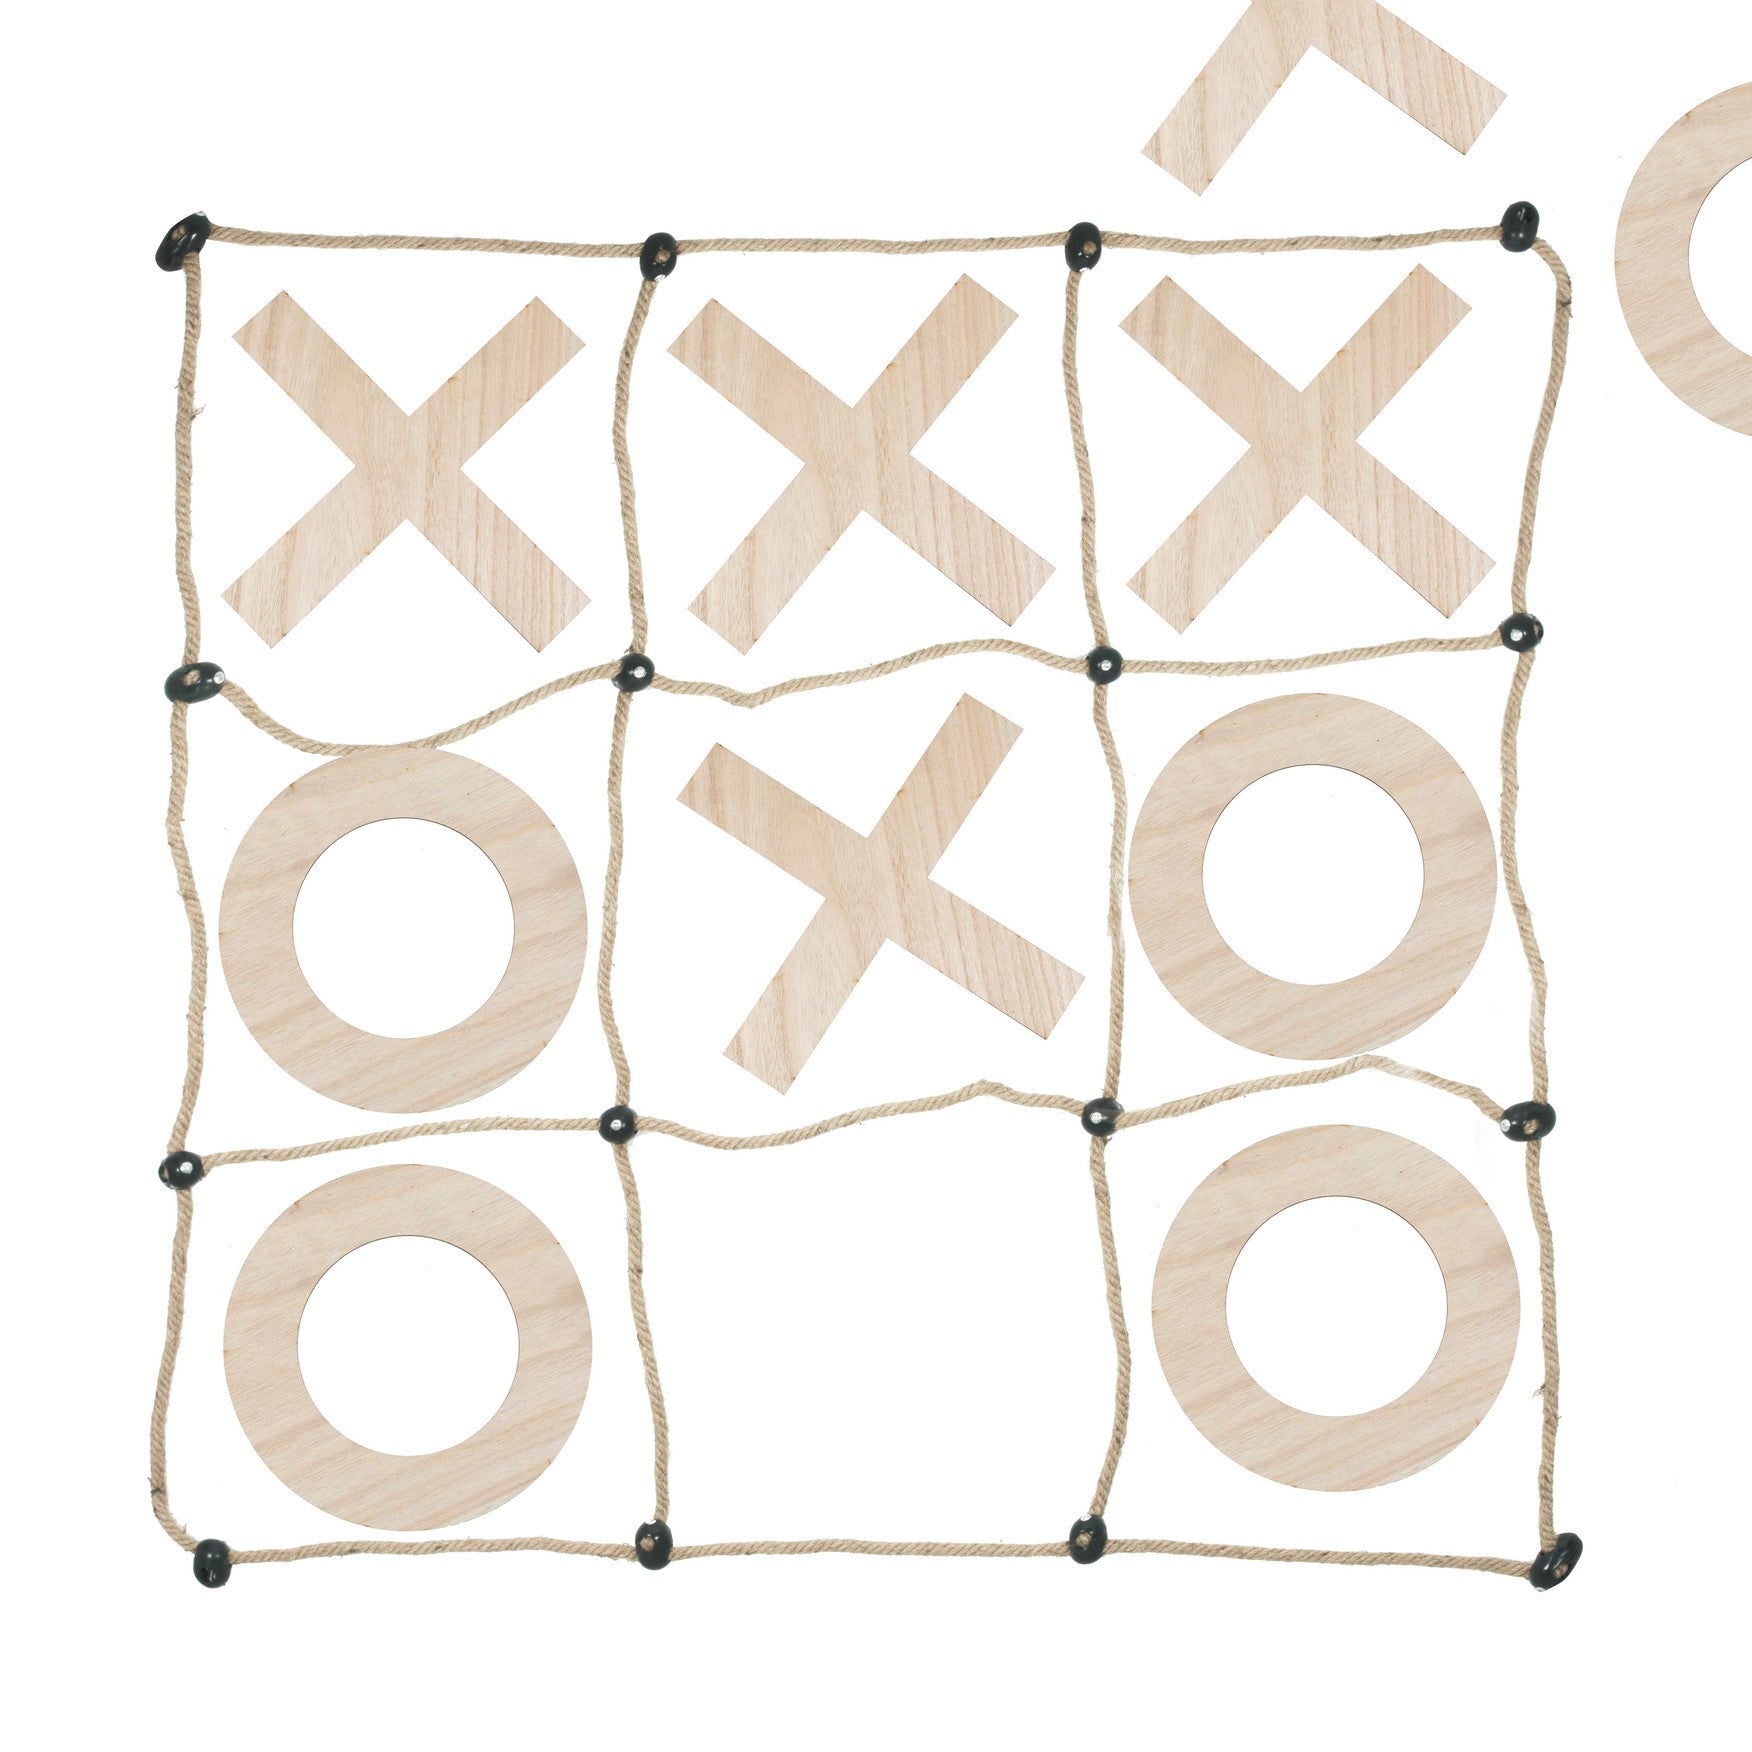 Game Large wood & rope outdoor 'O & X' Game